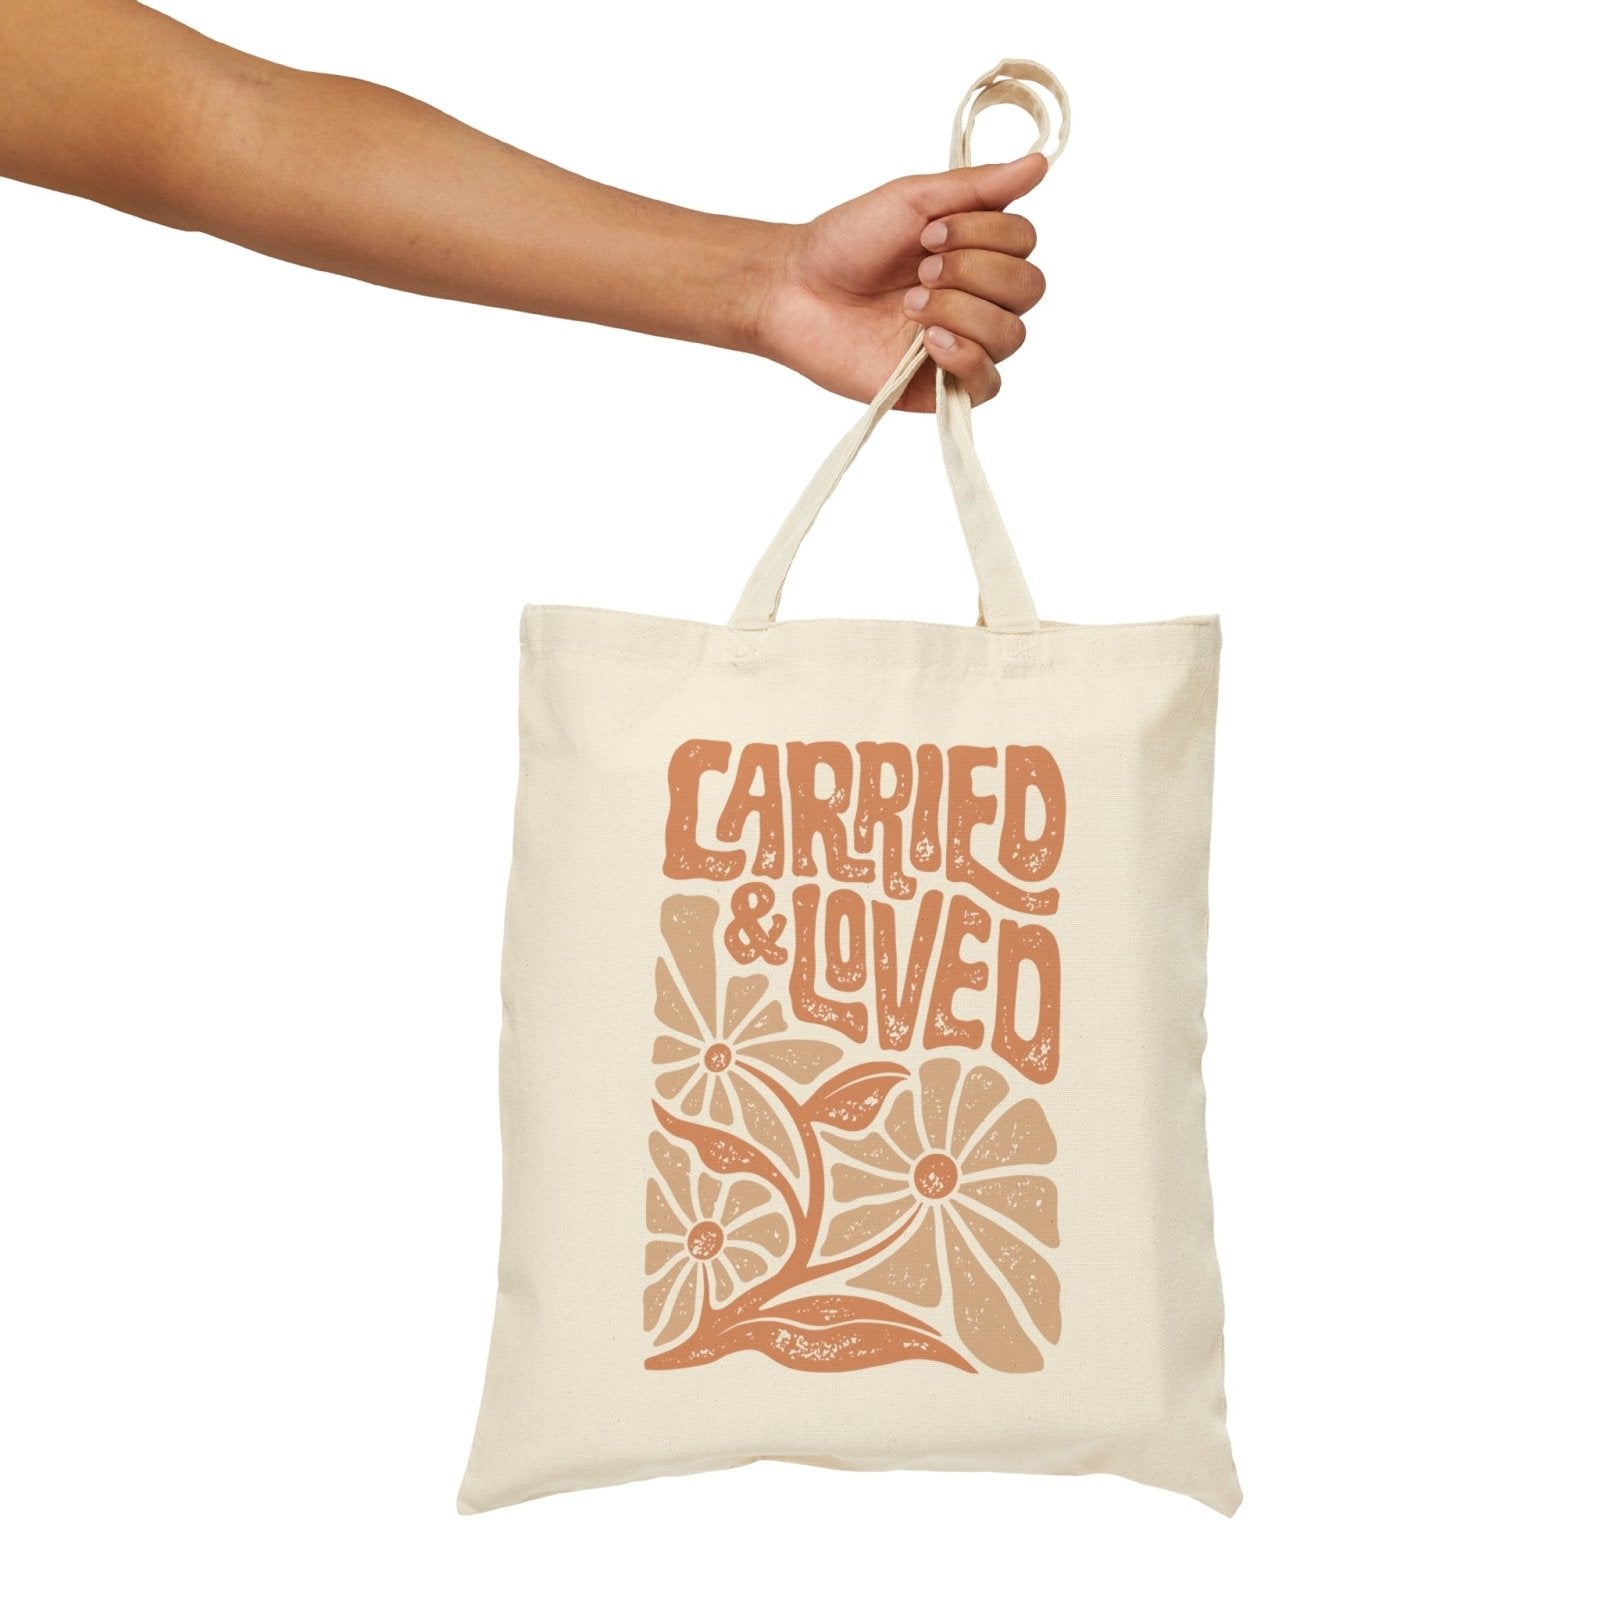 Cotton Canvas Tote Bag - Carried & Loved - Due To Joy - Baby Loss Resources and Miscarriage Gifts